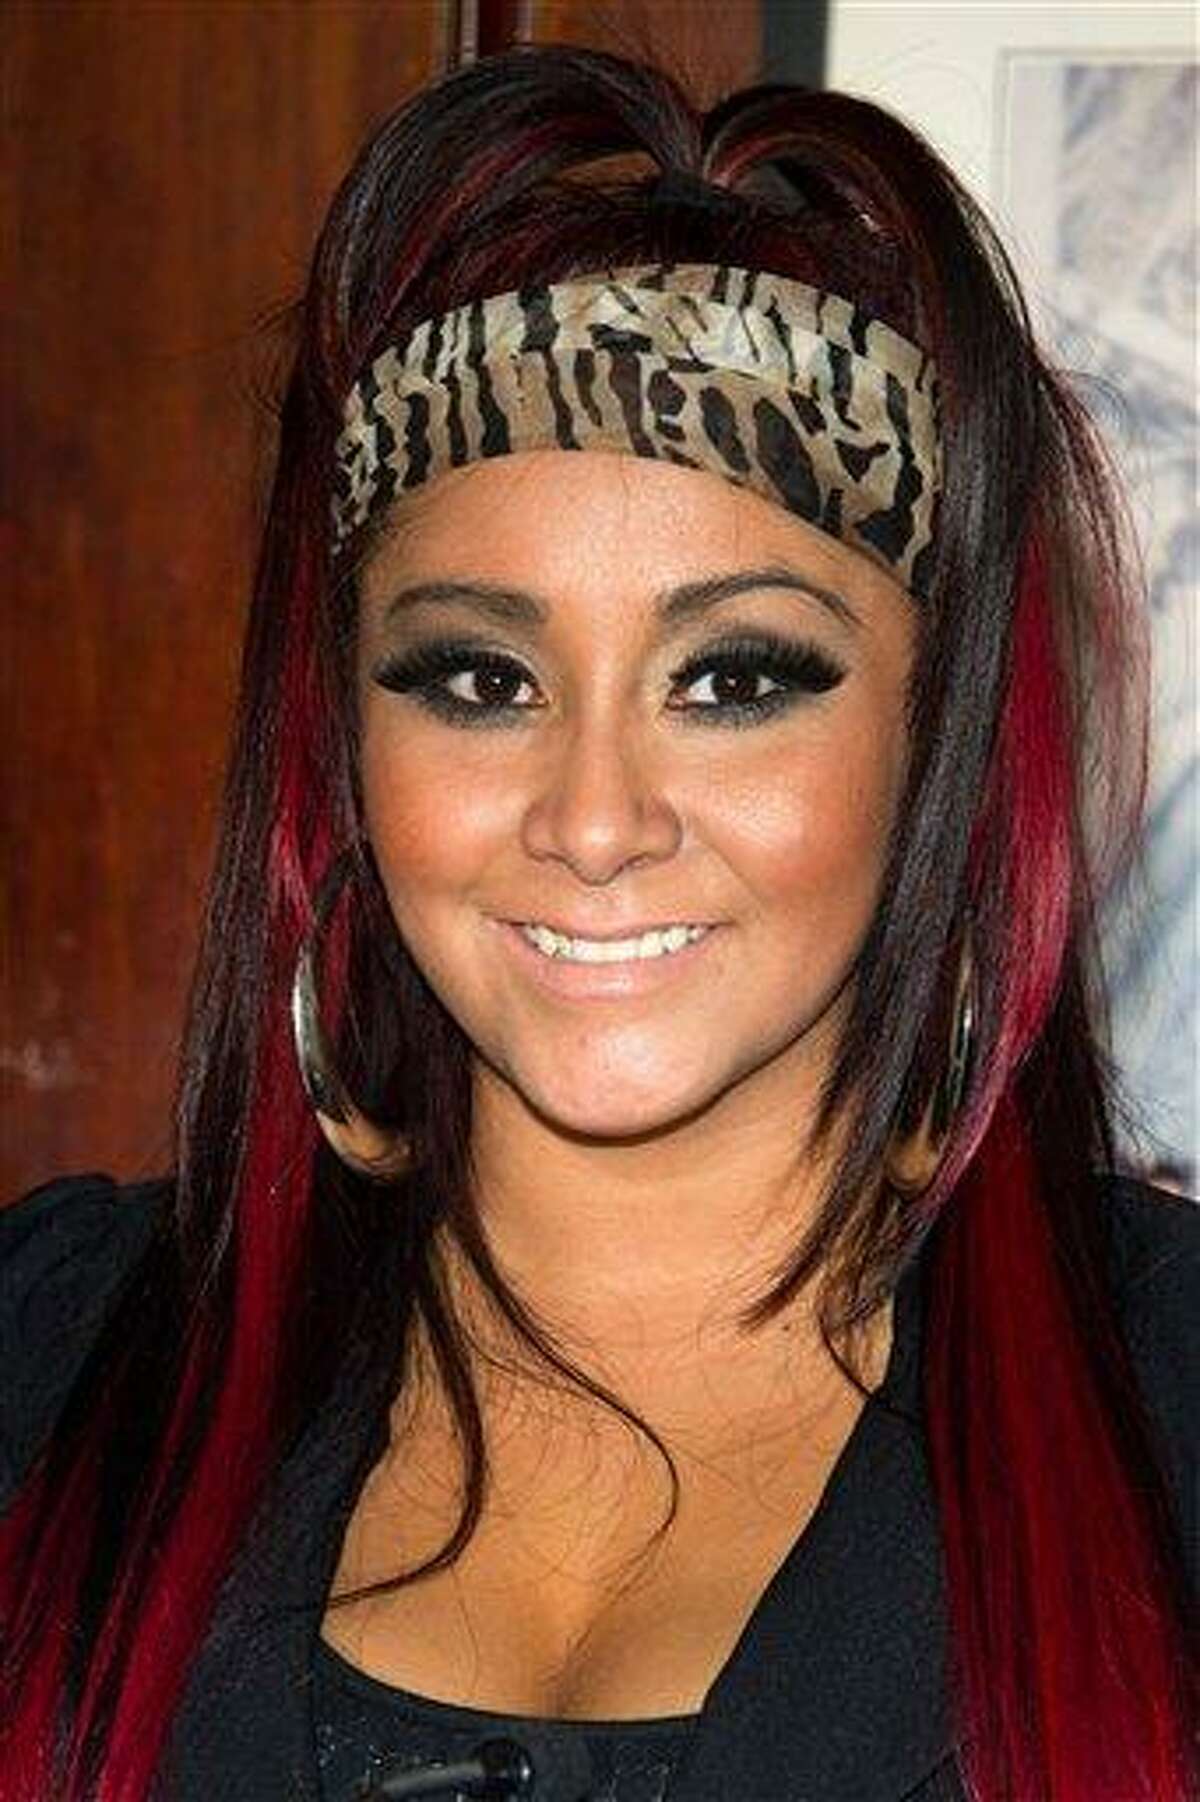 Nicole "Snooki" Polizzi gave birth to her first child early Sunday morning at Saint Barnabas Medical Center in Livingston, N.J., according to MTV. Associated Press file photo